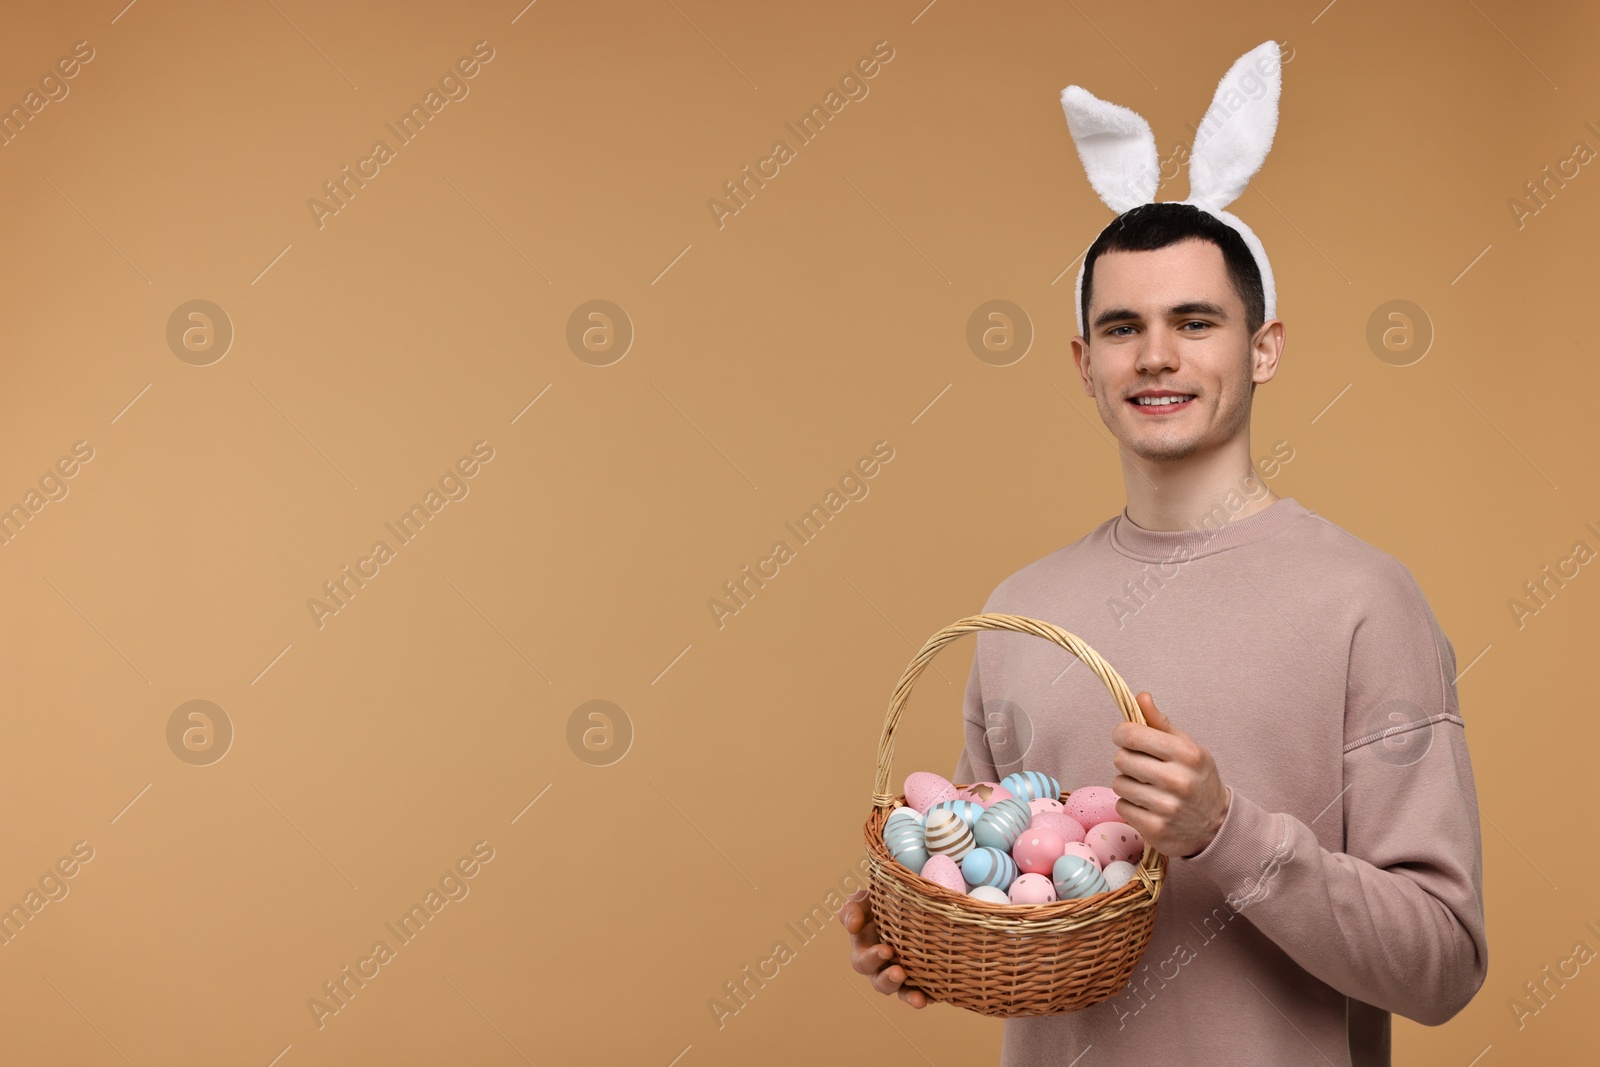 Photo of Easter celebration. Handsome young man with bunny ears holding basket of painted eggs on beige background. Space for text